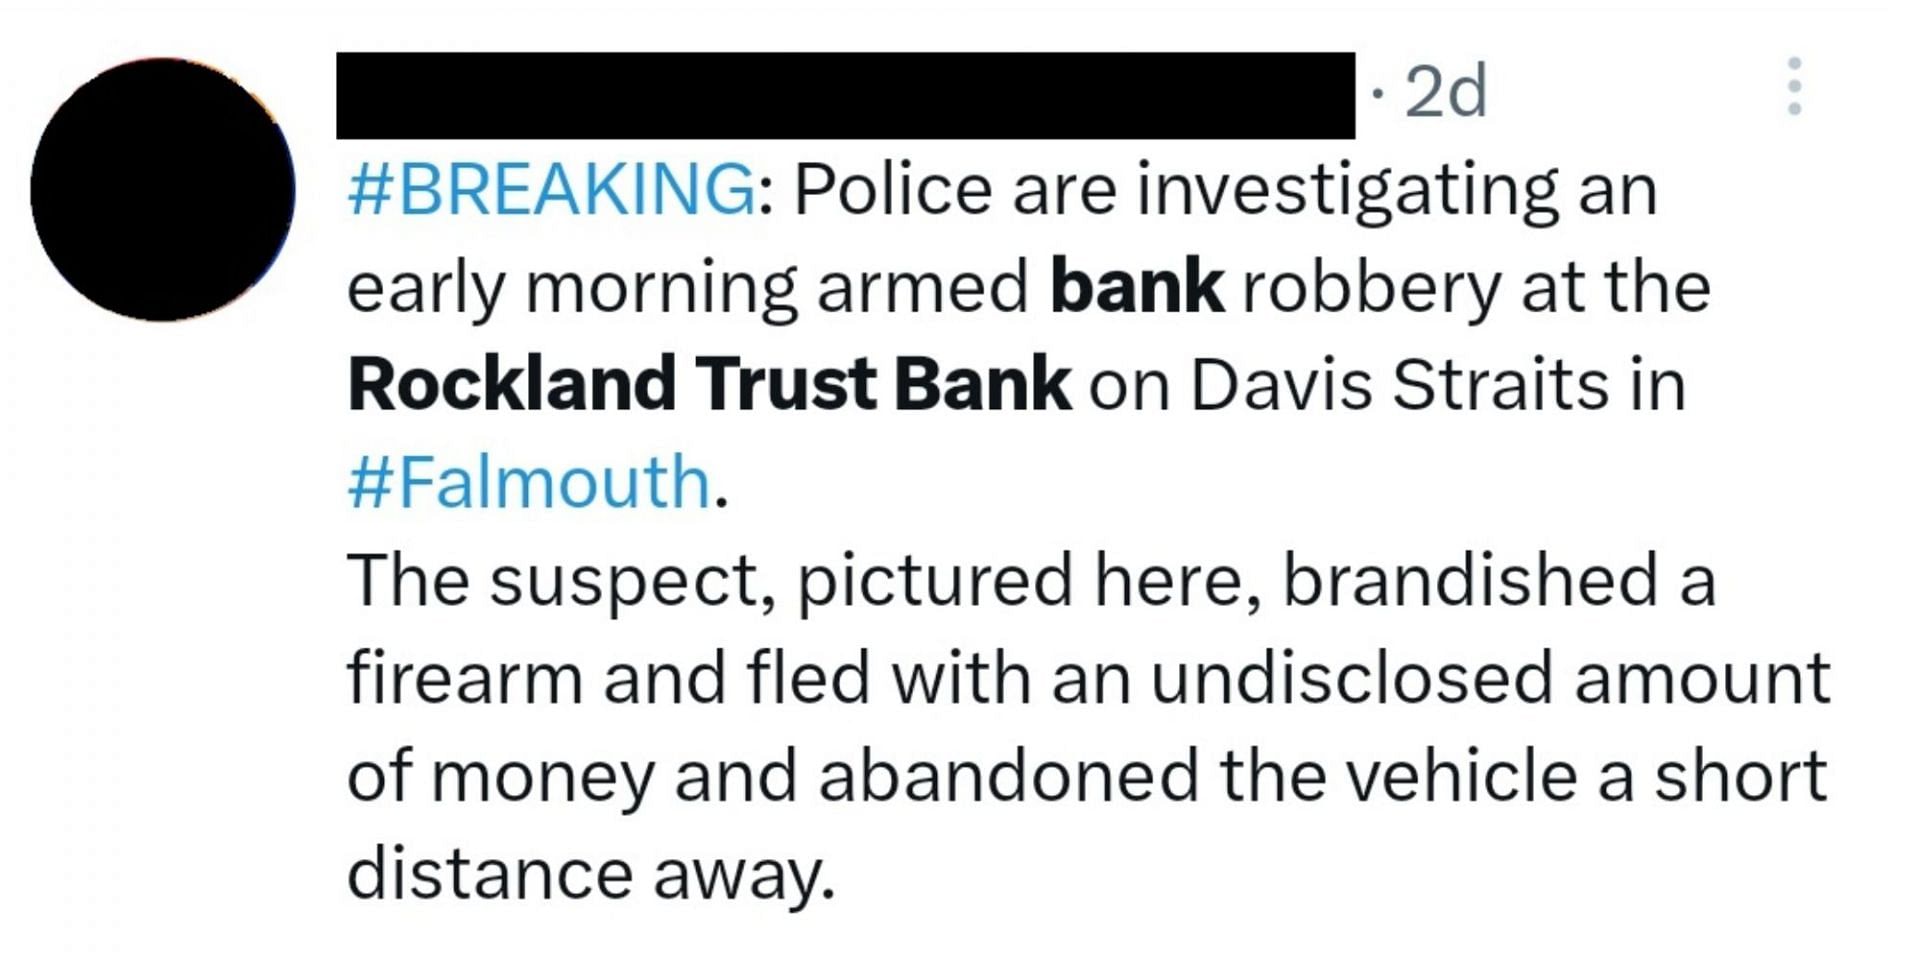 Robbery at Rockland Trust Bank, Falmouth. (Image via Twitter)